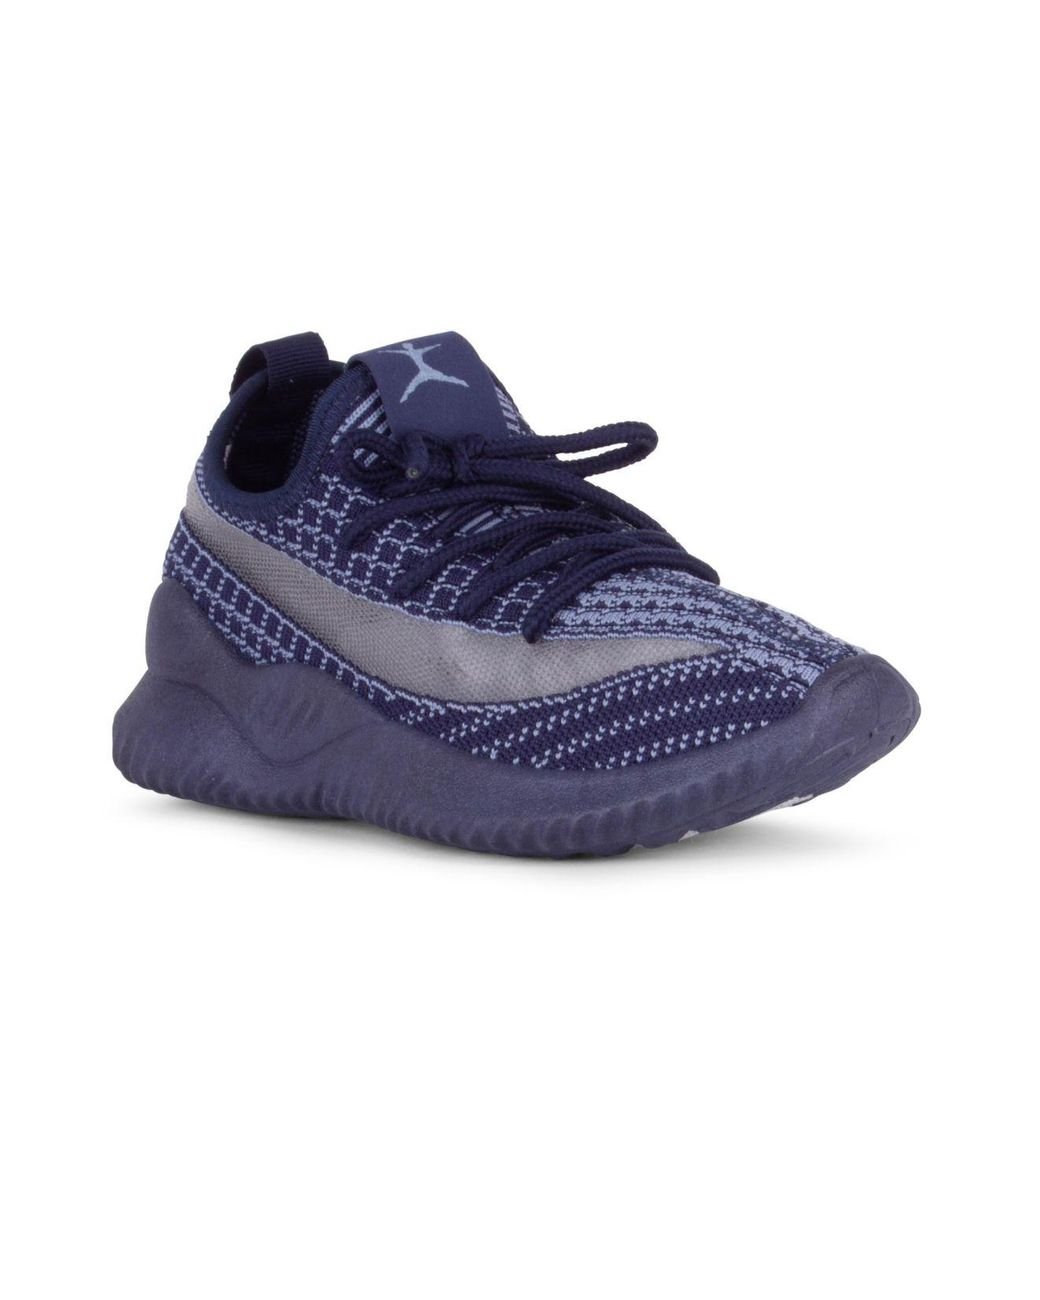 Danskin Synthetic Ecstatic Lace Up Sneaker With Patterned Upper in Navy ...